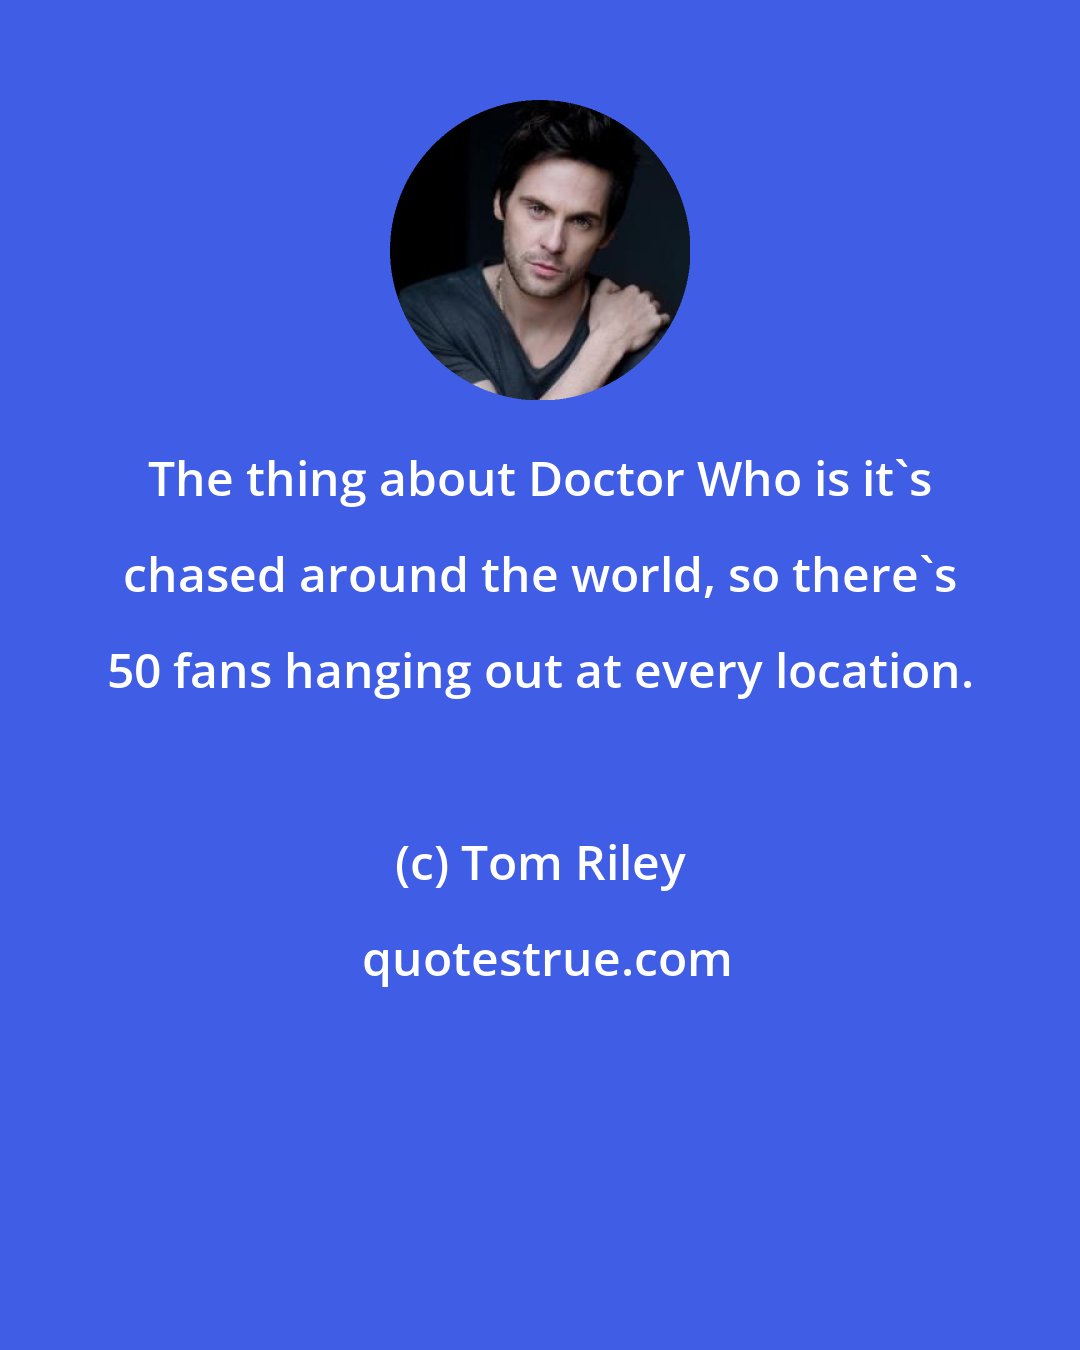 Tom Riley: The thing about Doctor Who is it's chased around the world, so there's 50 fans hanging out at every location.